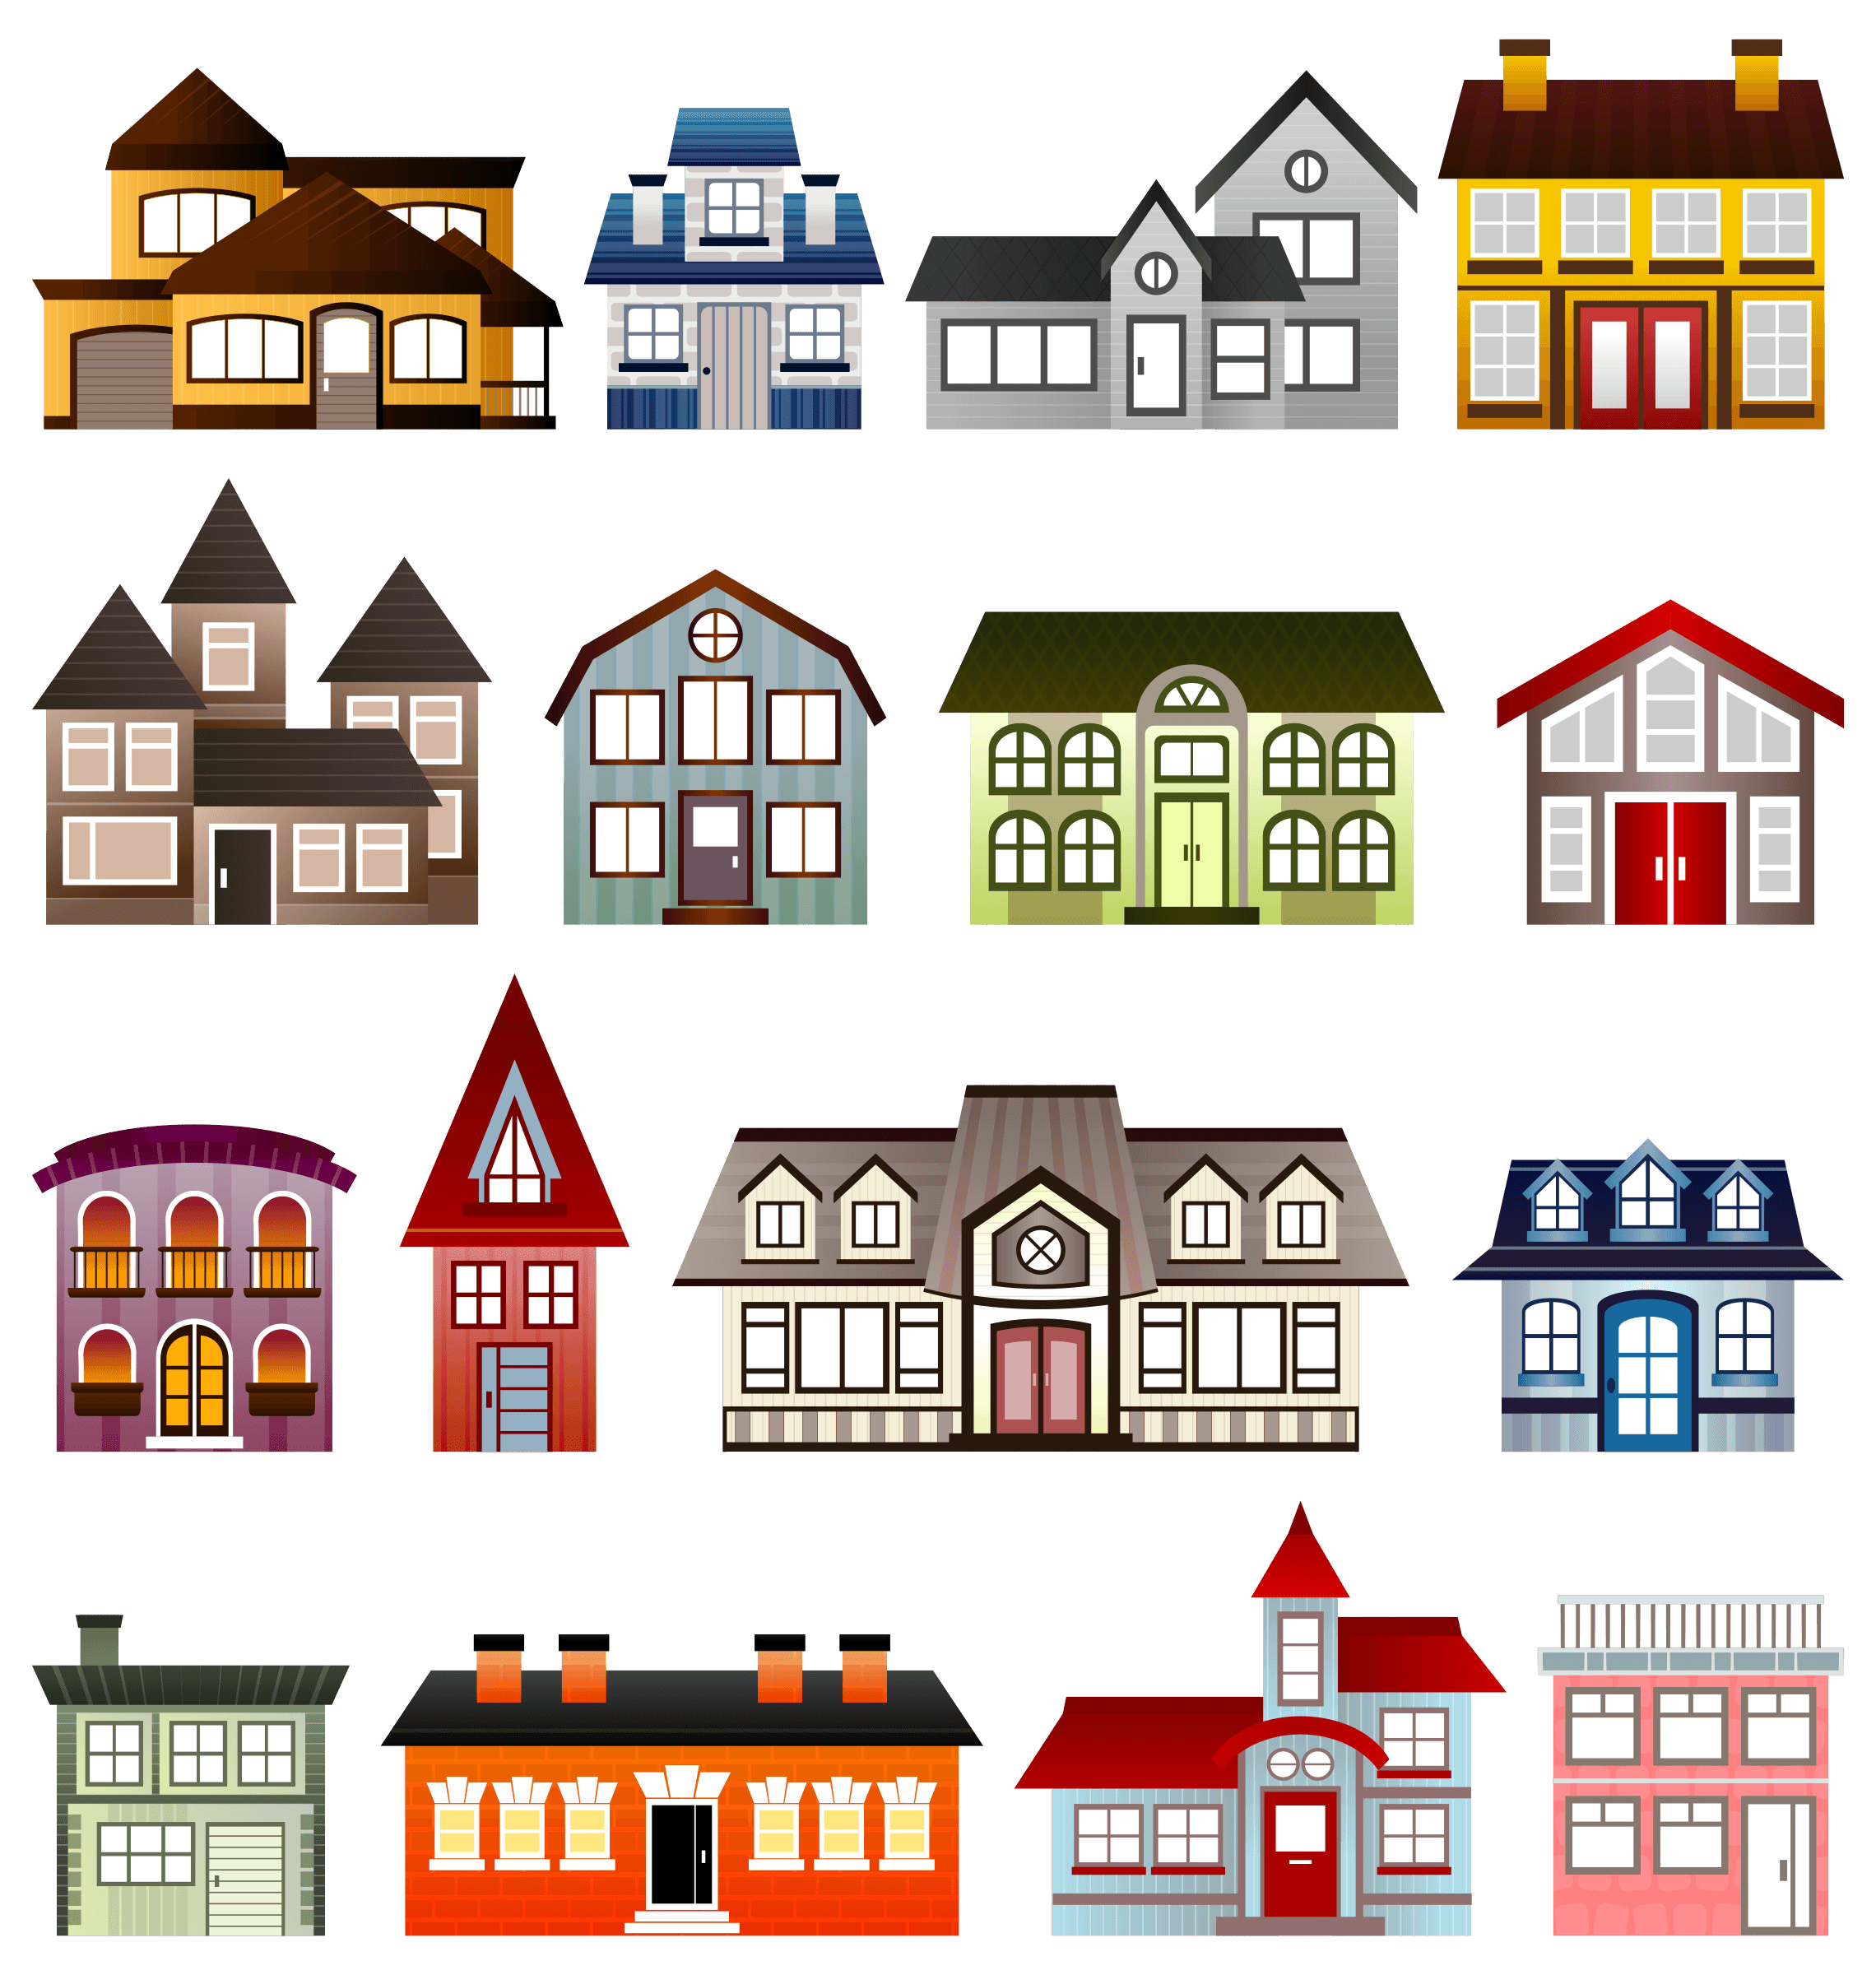 Free Hand Drawn House Photos and Vectors